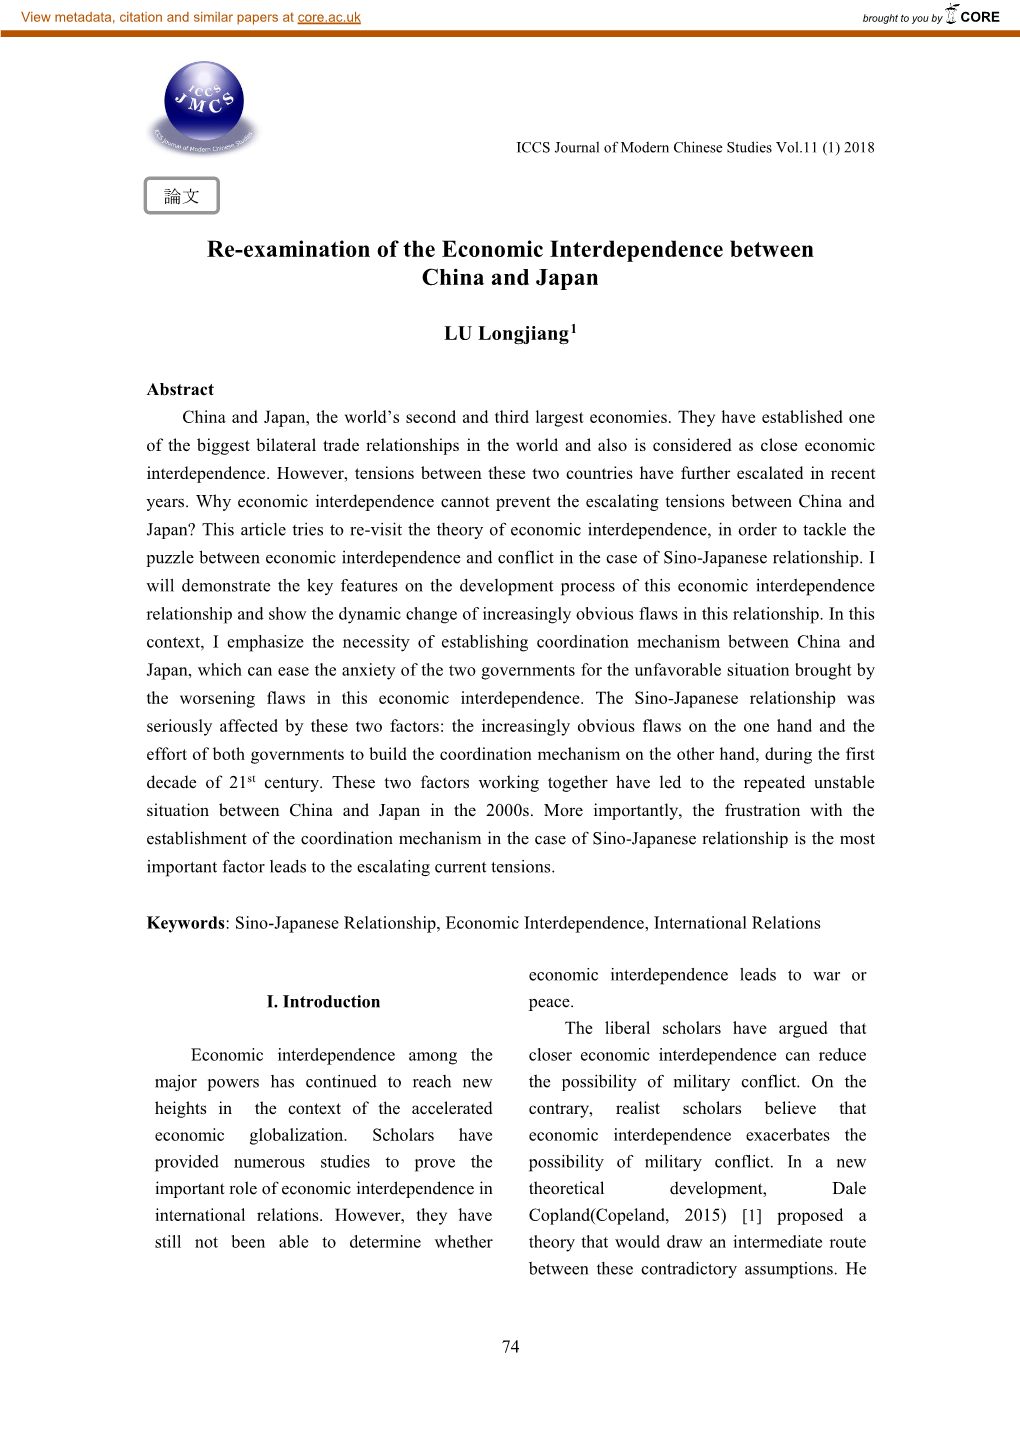 Re-Examination of the Economic Interdependence Between China and Japan